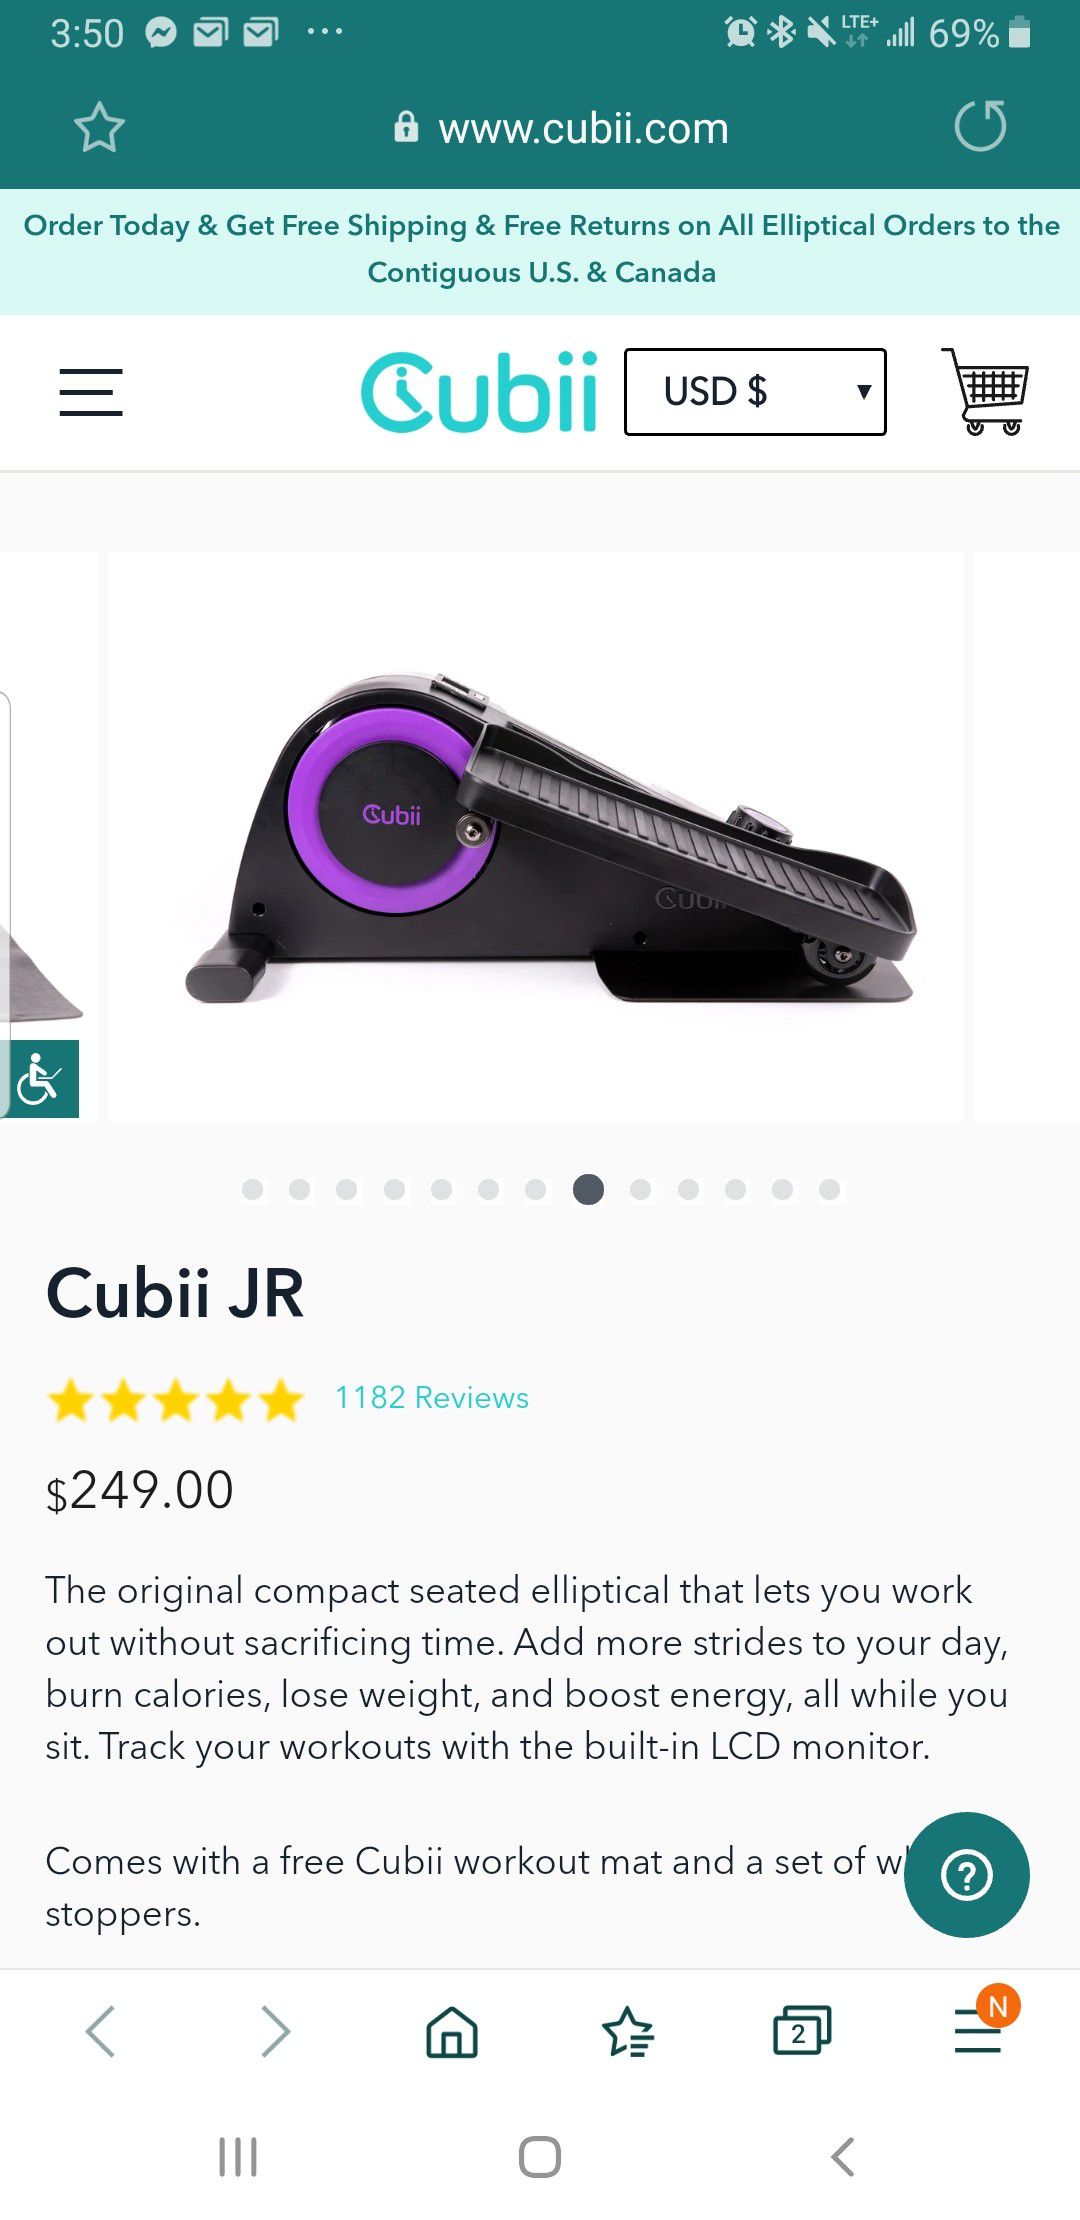 THIS IS A CUBII JR. NEW